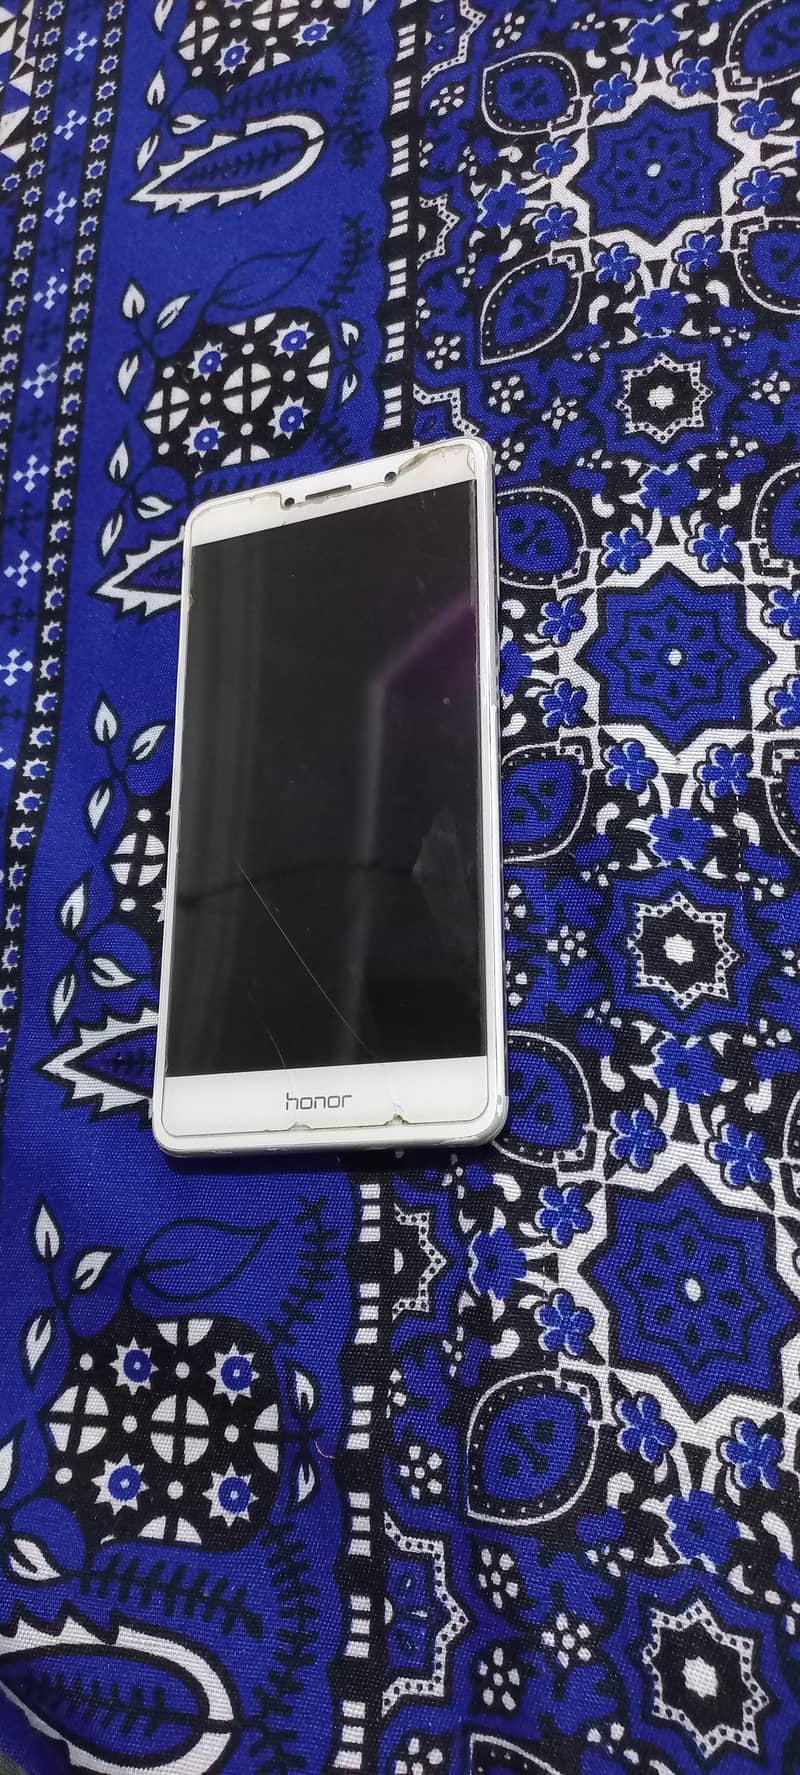 Huawei Honor 6x storage 3/32 for sale in good condition 0